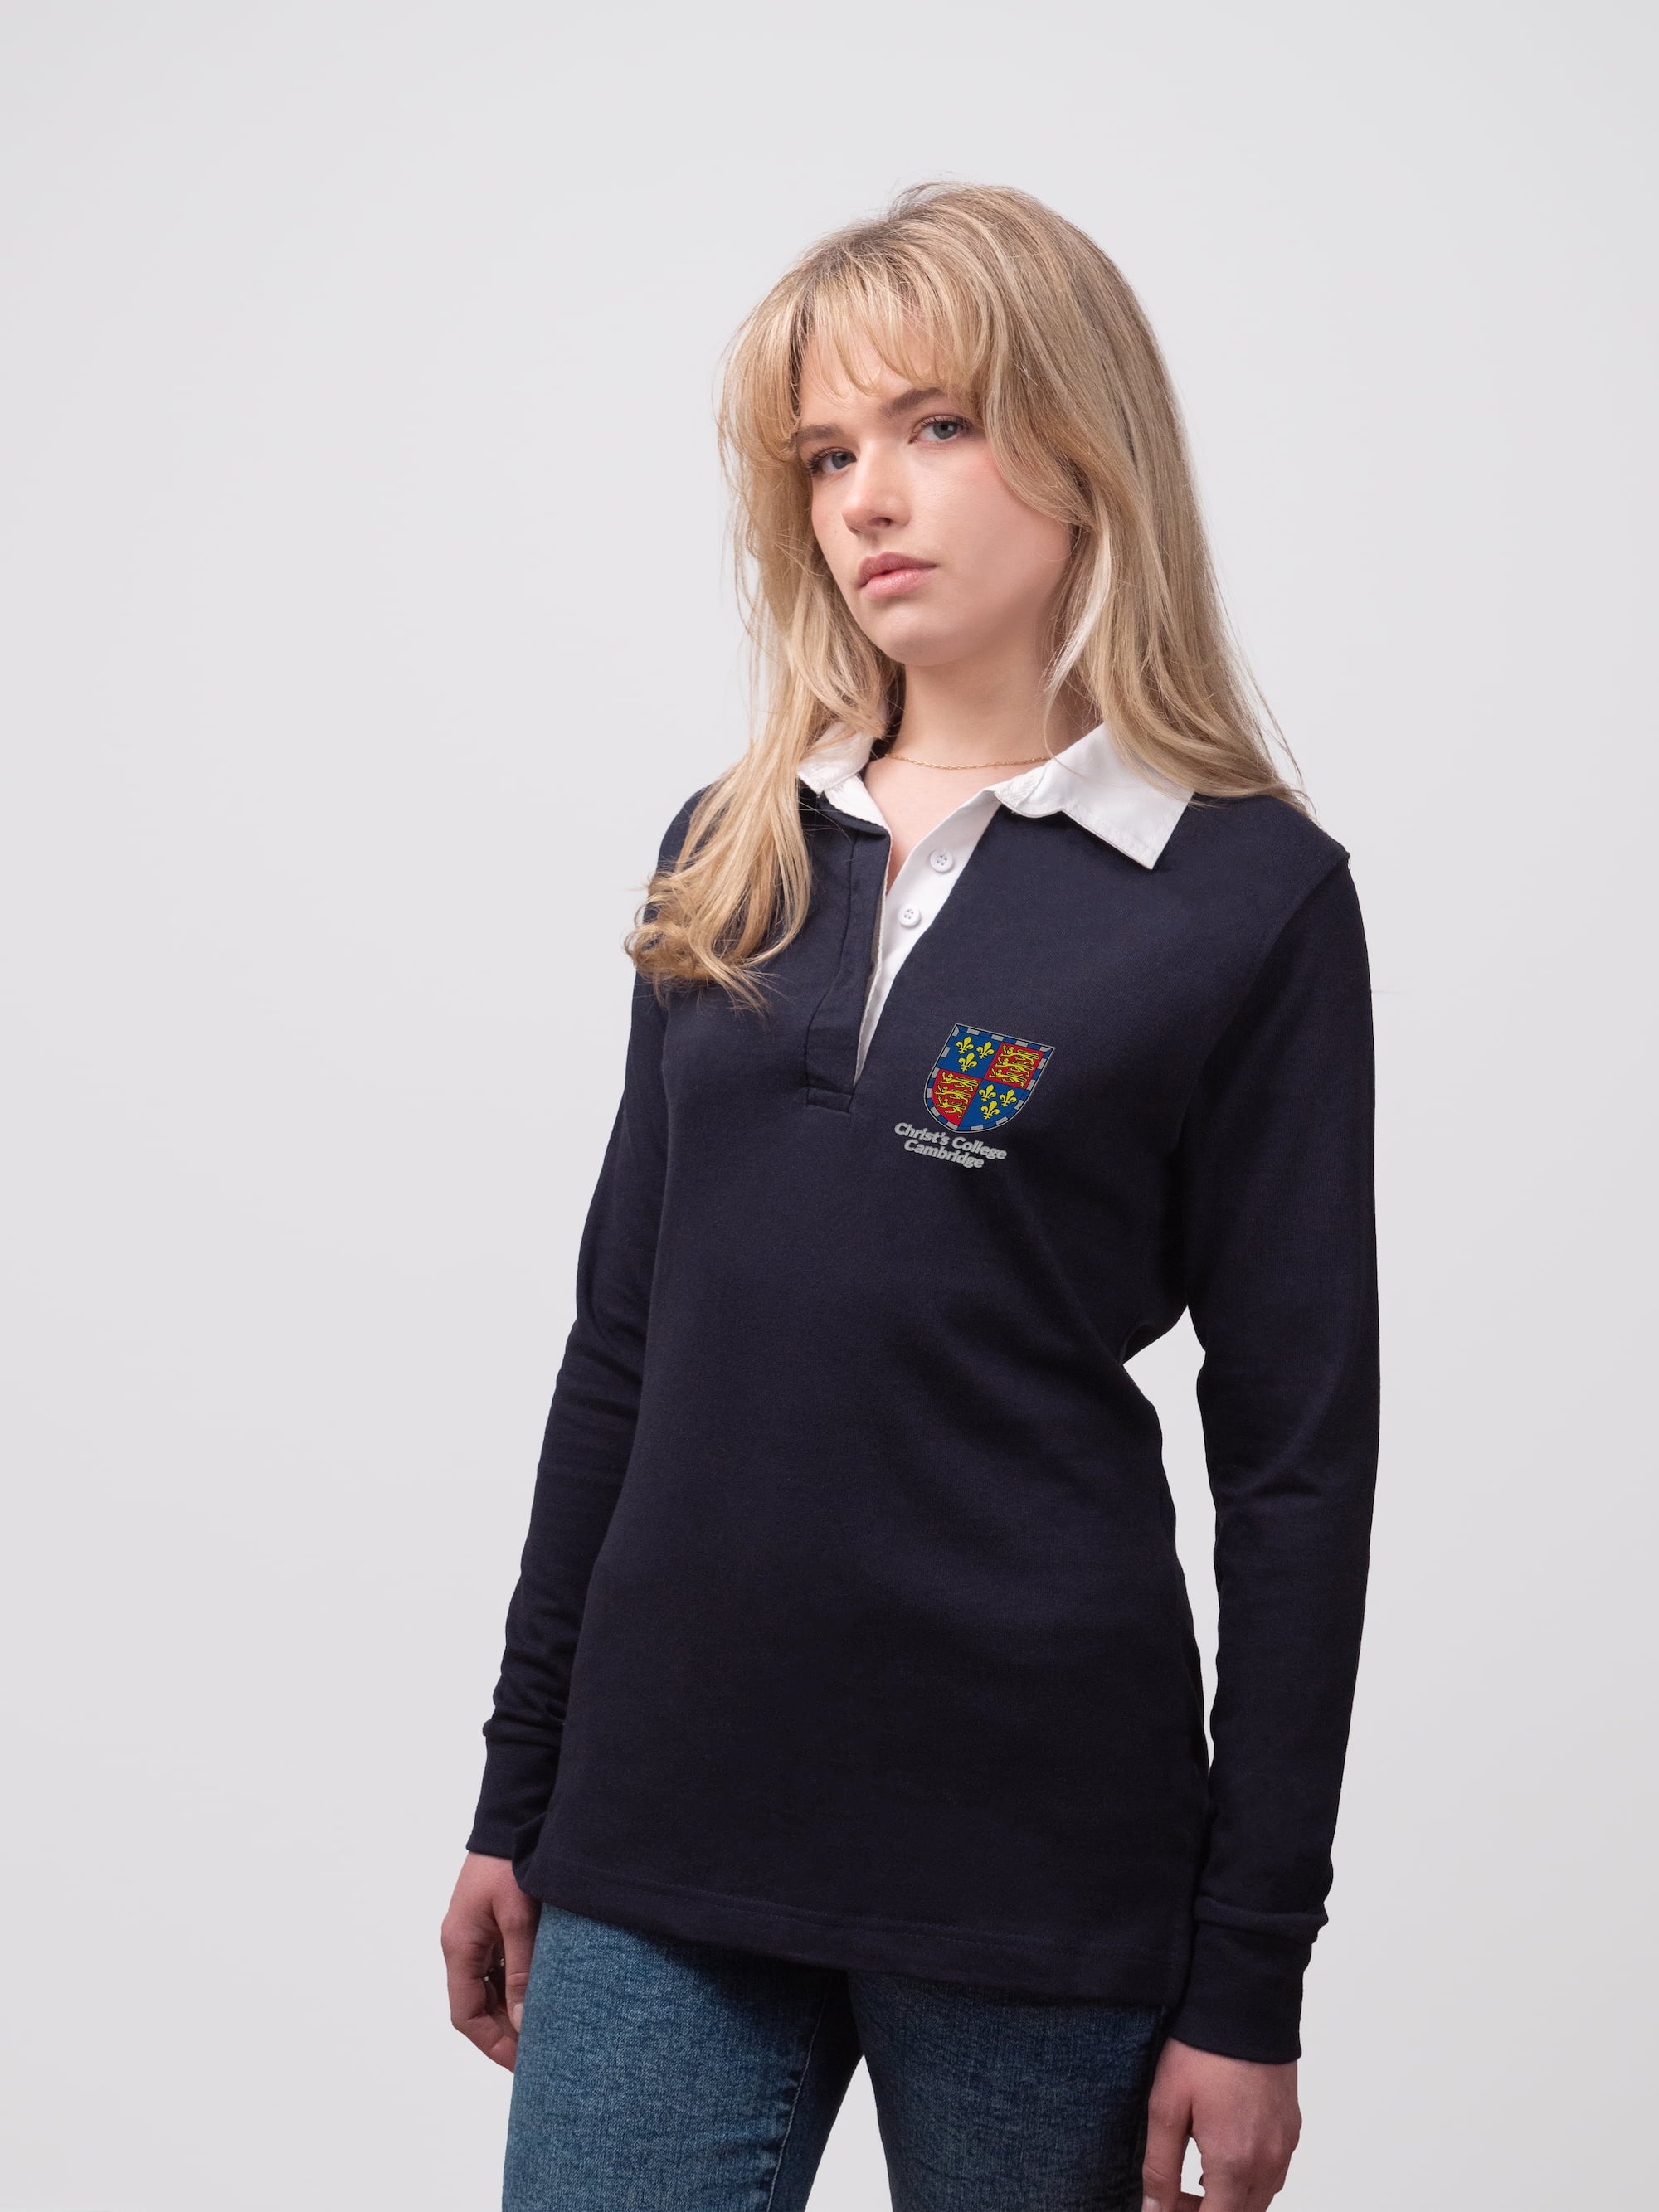 Student wearing a navy Christ's College rugby shirt with embroidered crest